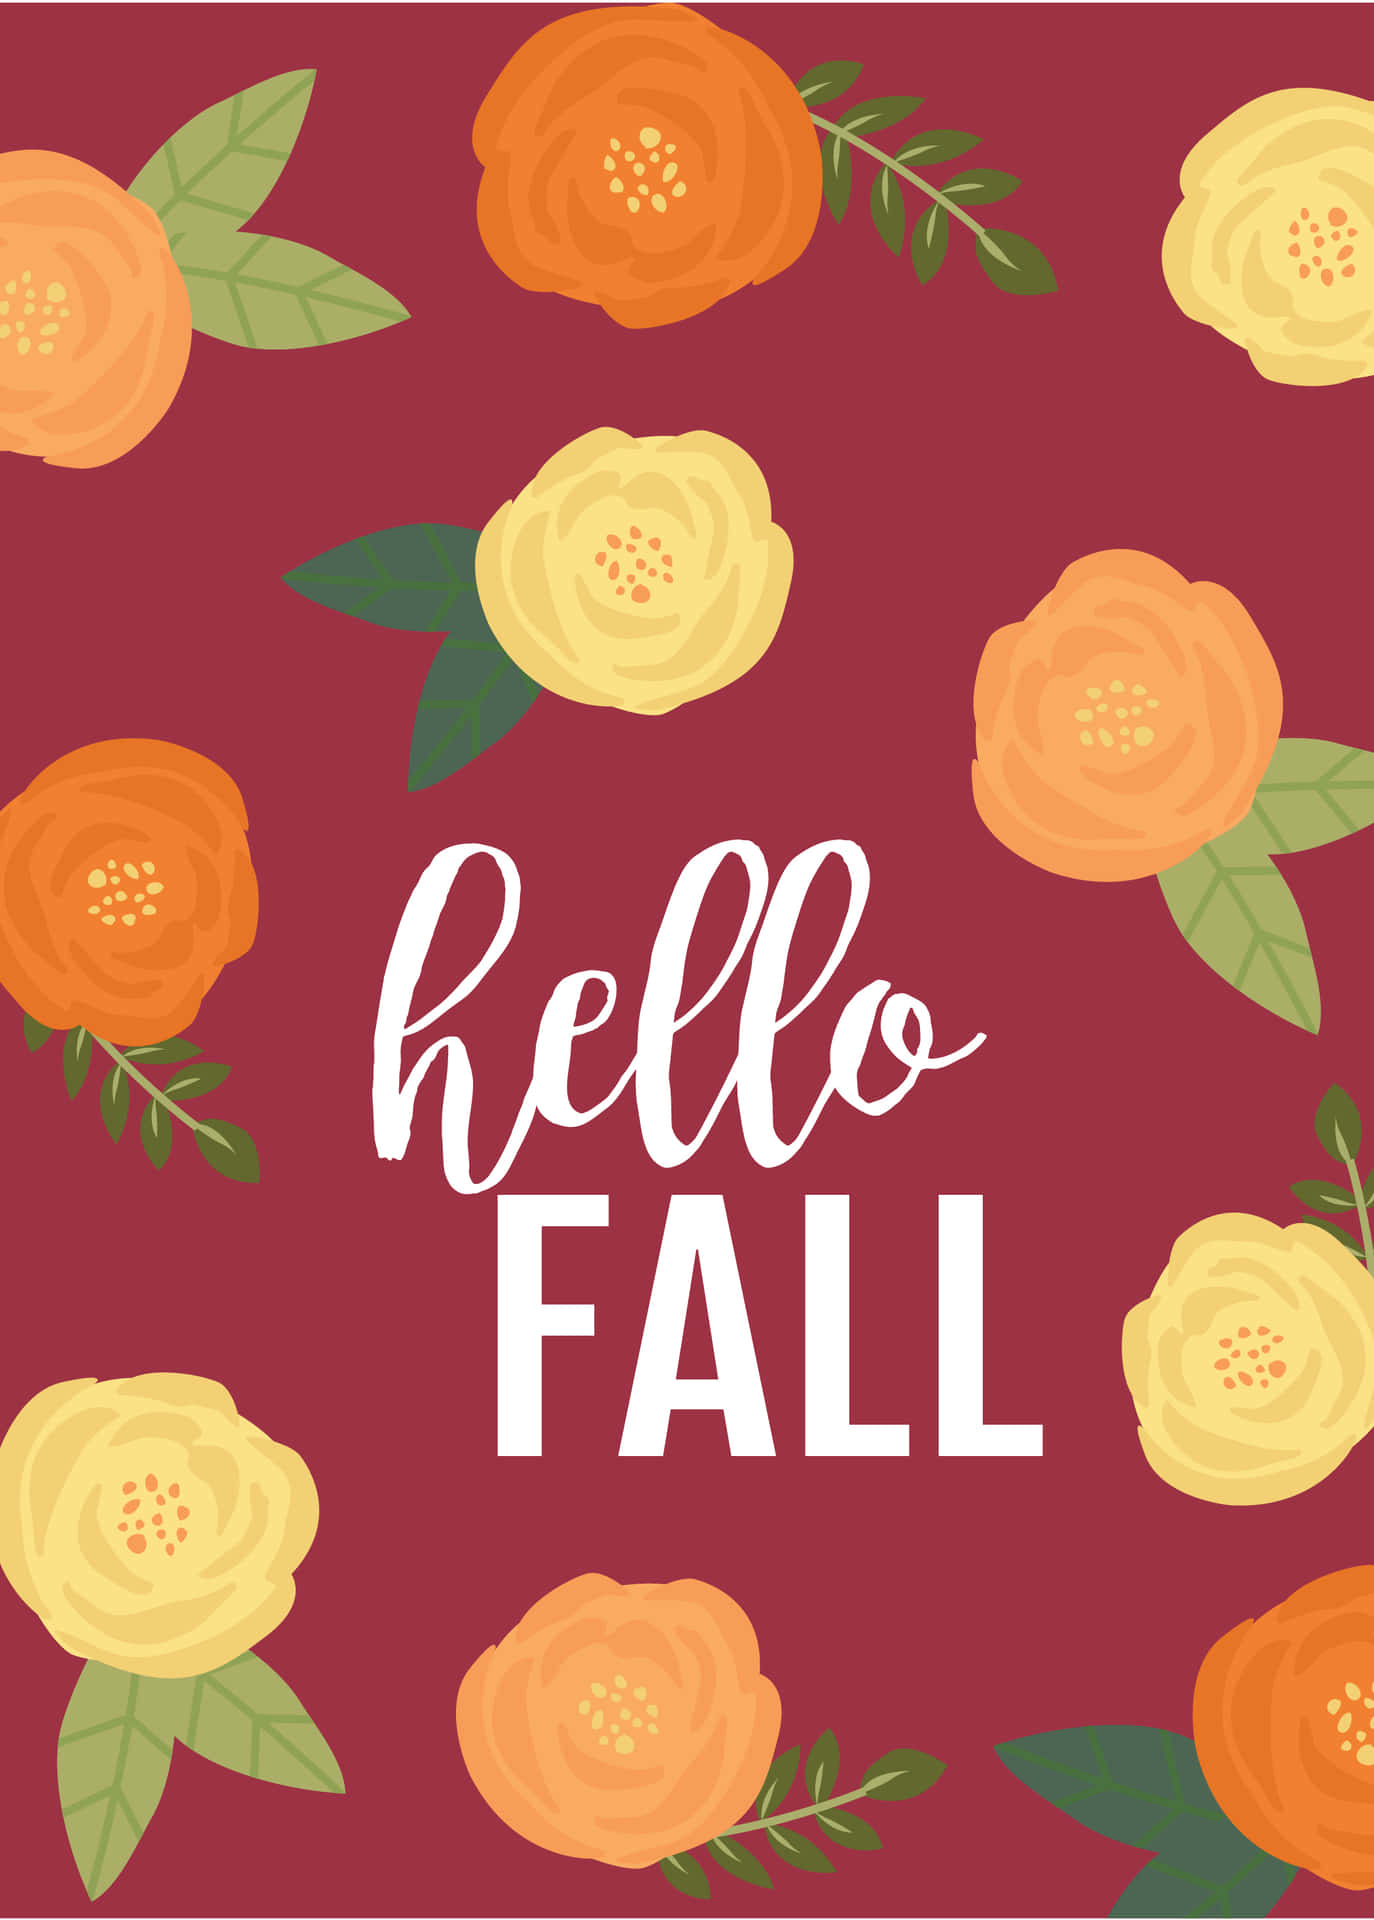 Welcome the Fall season with a stunning, sun-filled view Wallpaper